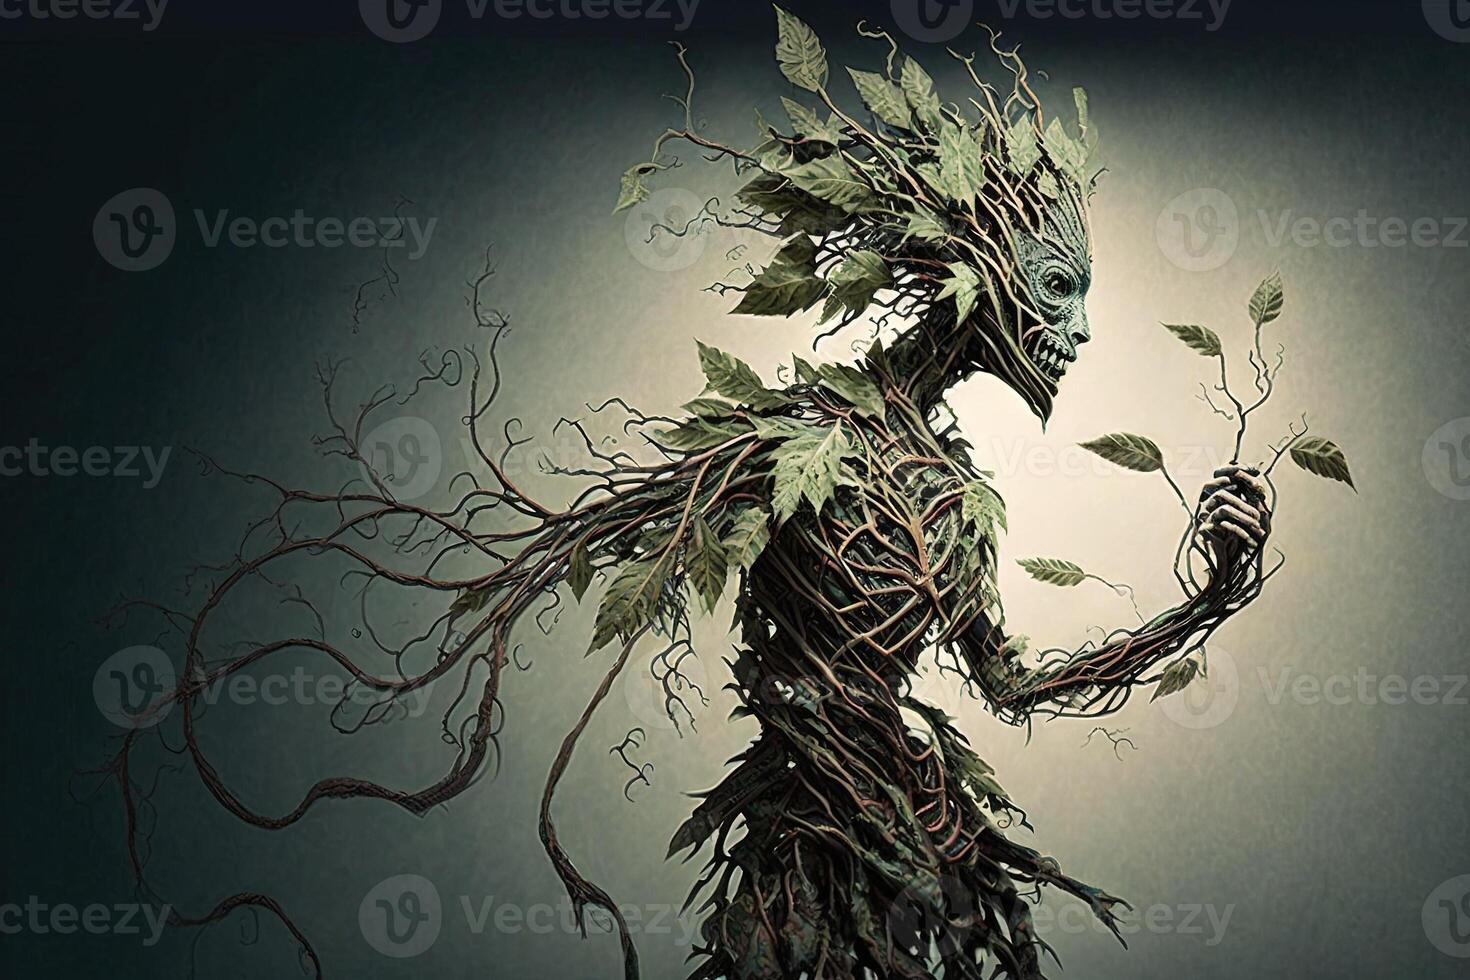 Fantasy plant like creature with a complex network of vines and branches, constantly reaching out and growing illustration photo